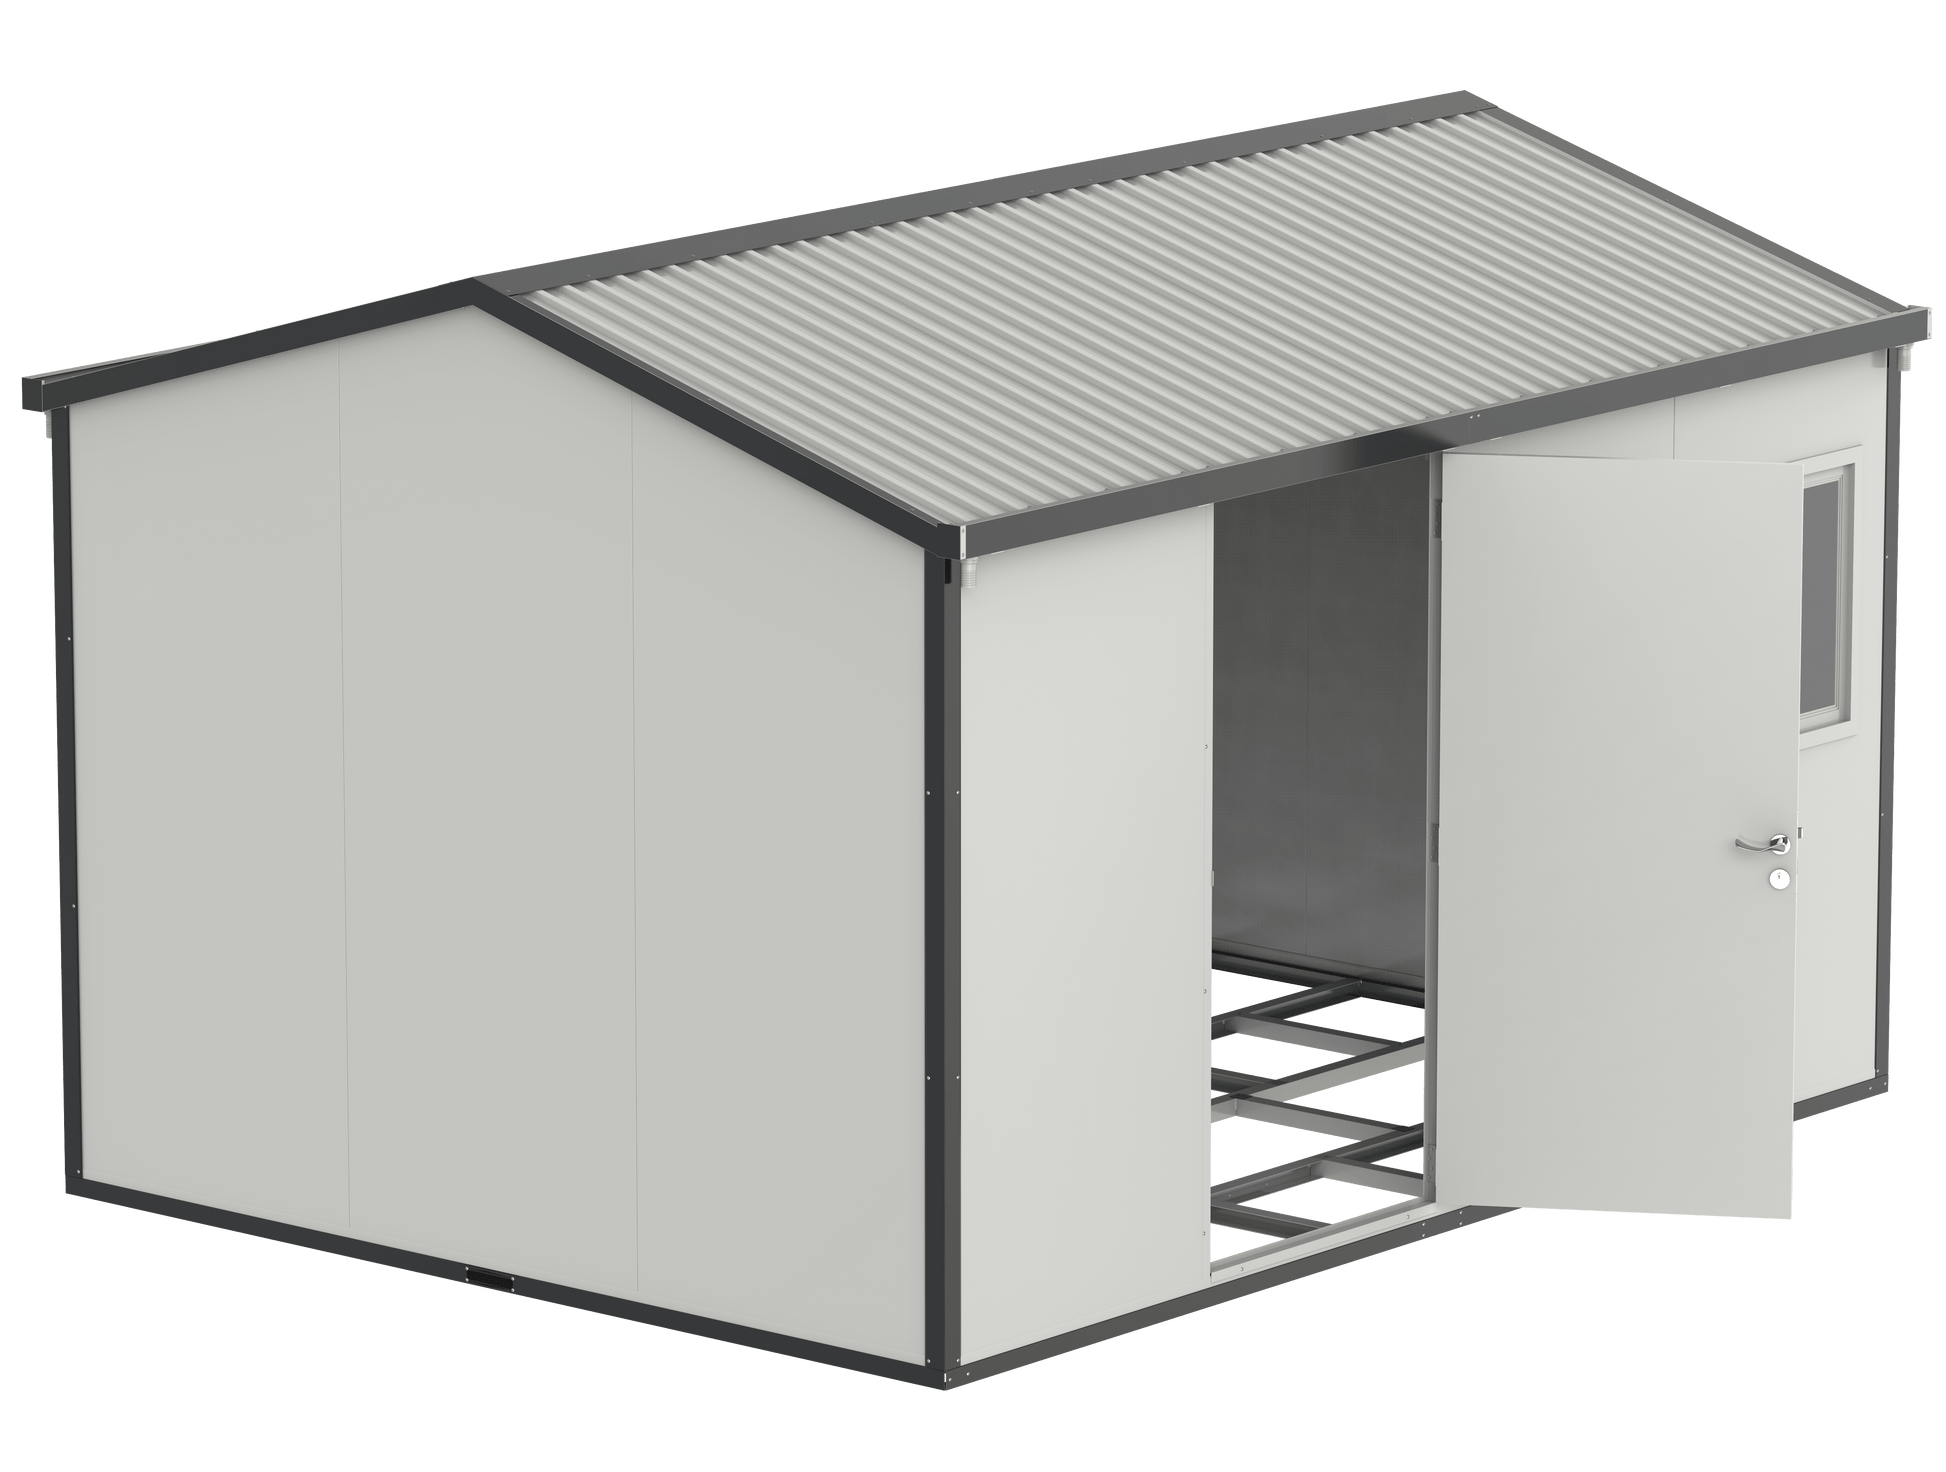 DuraMax 13x10 Gable Roof Insulated Building